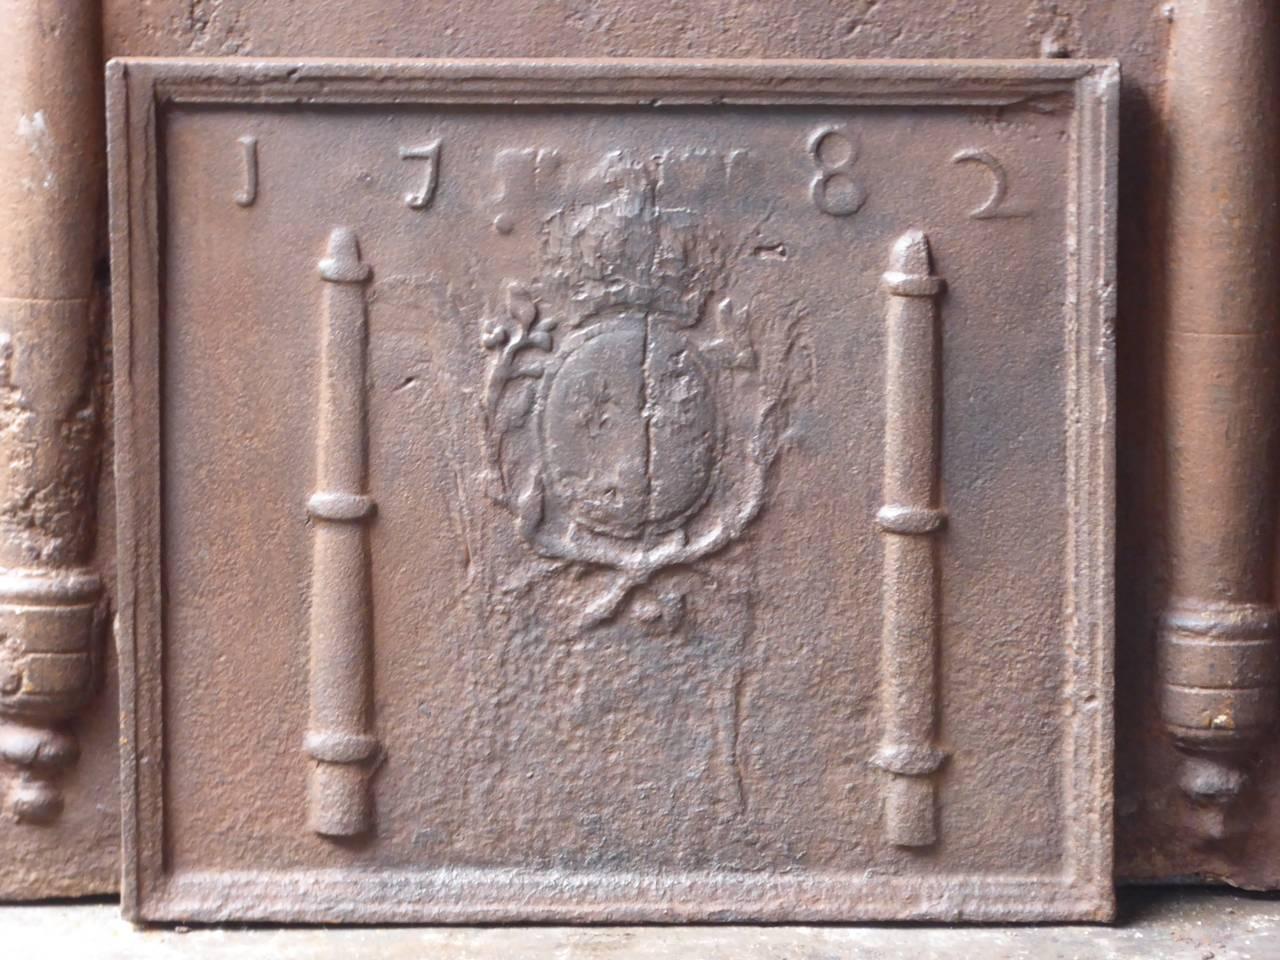 18th century French Louis XV fireback with two pillars and the arms of France. The crown stands for royalty, the olive wreath symbolizes peace and victory and the lilies symbolize French aristocracy. The arms were partially truncated during the